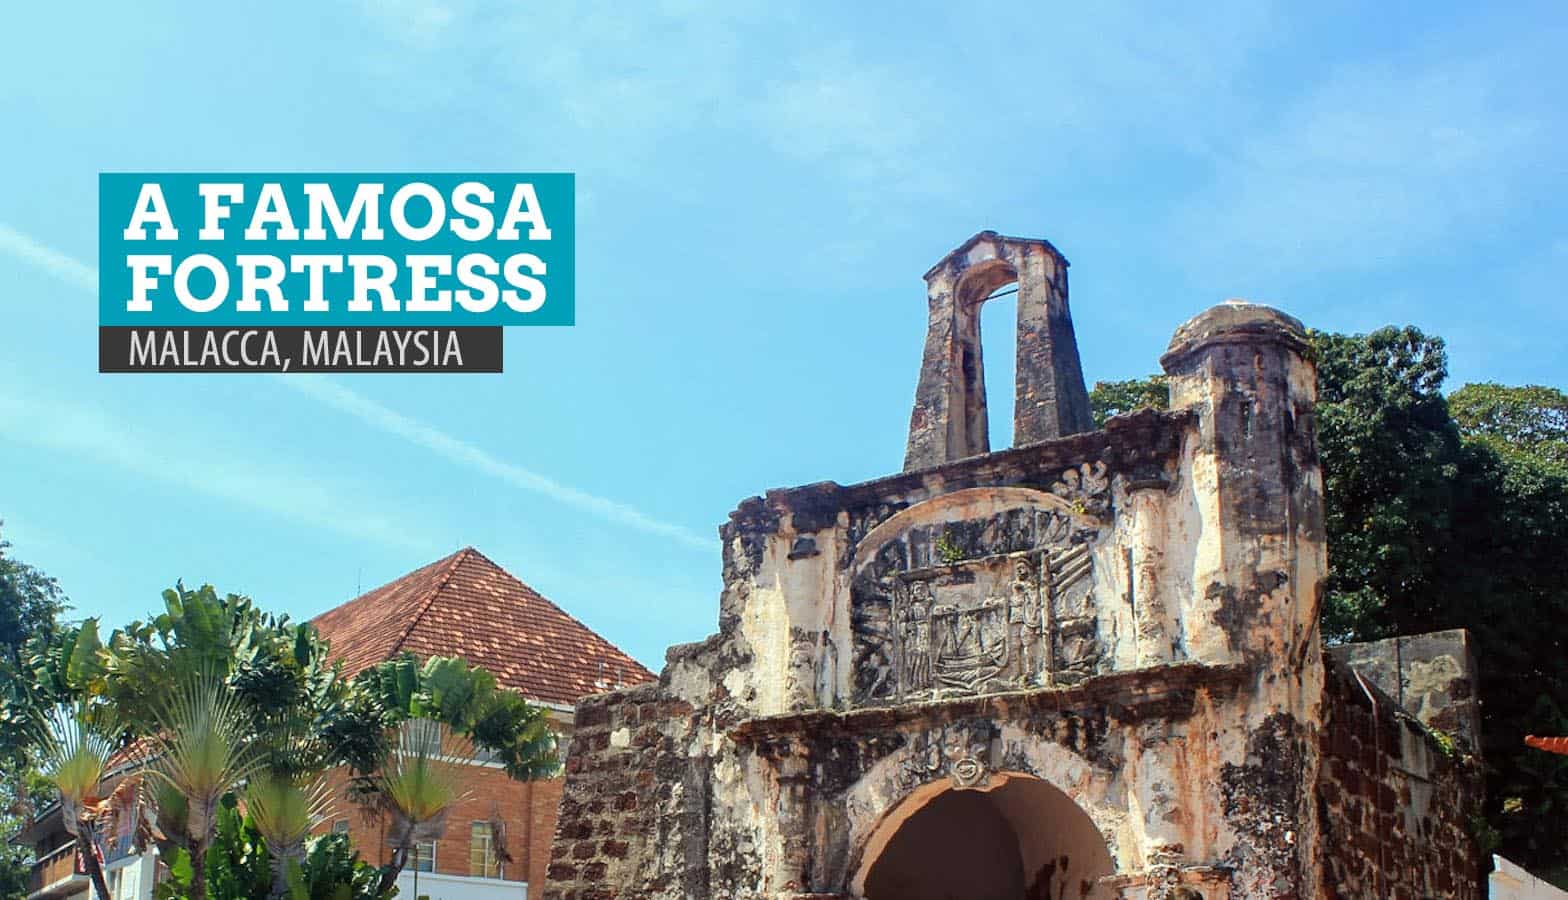 A FAMOSA FORTRESS: Unearthing and Rebuilding Malacca’s History